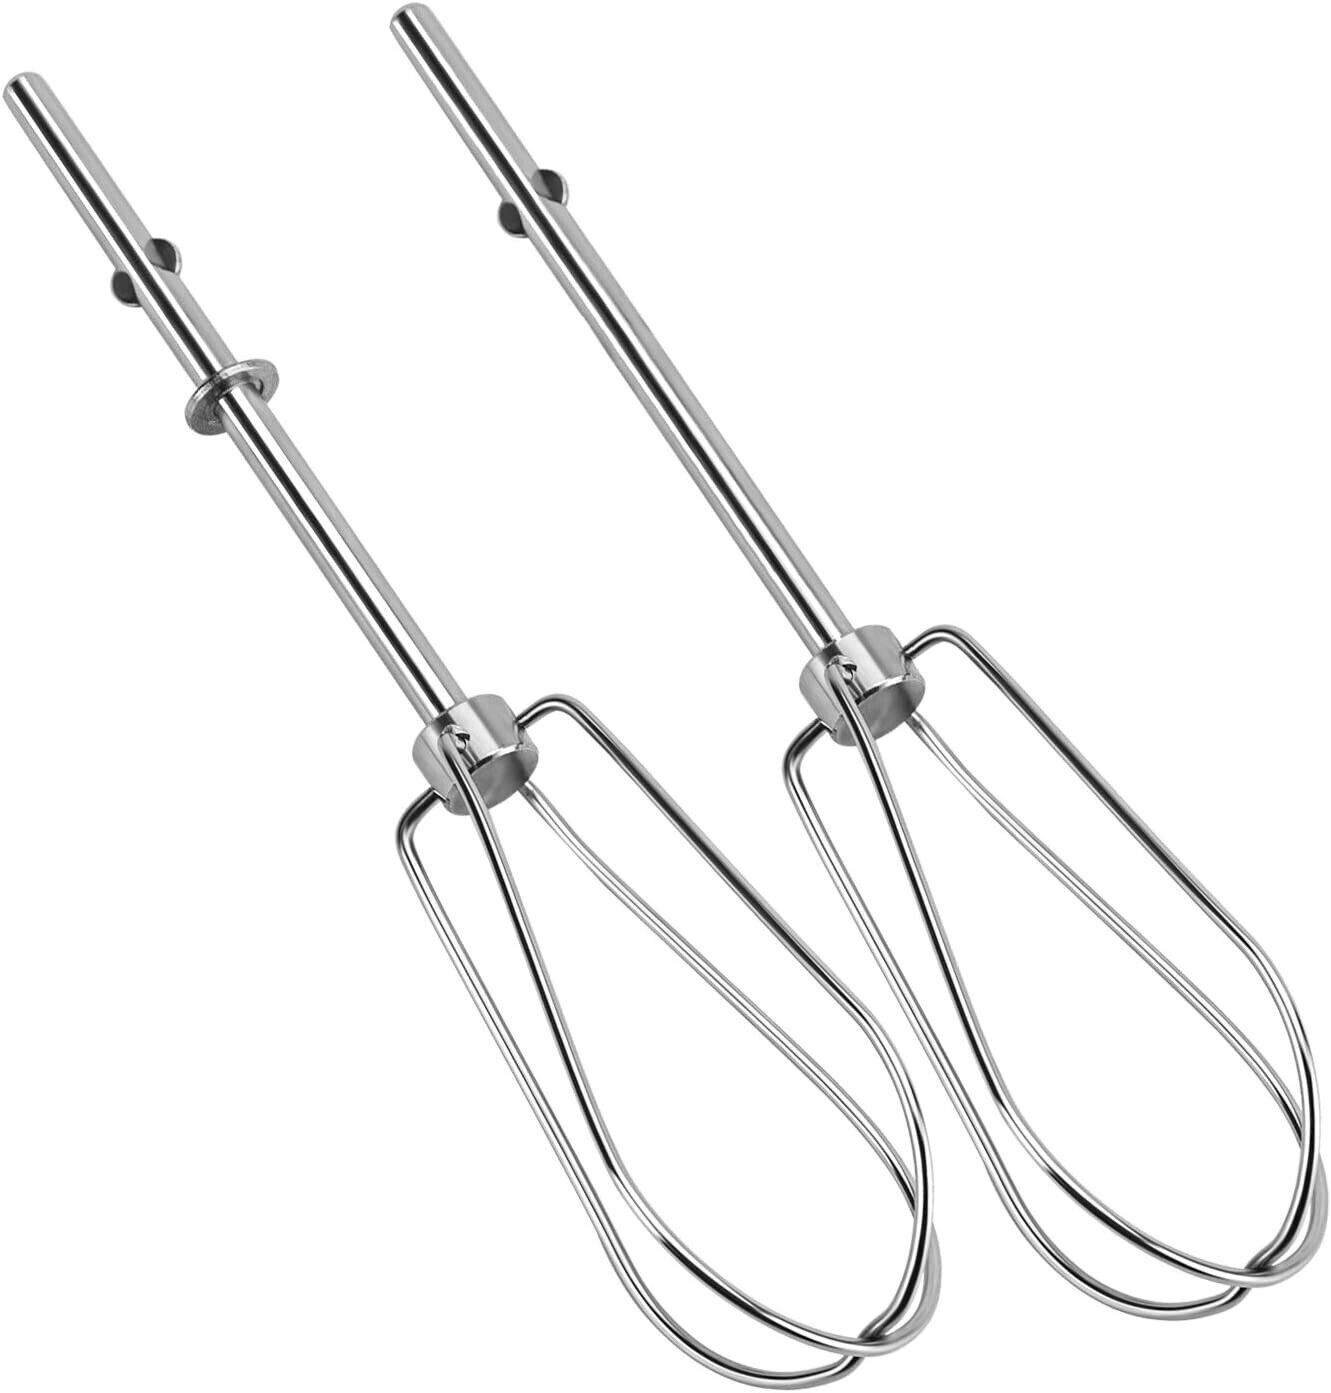 2 PACK Hand Mixer Beaters for Kitchenaid W10490648